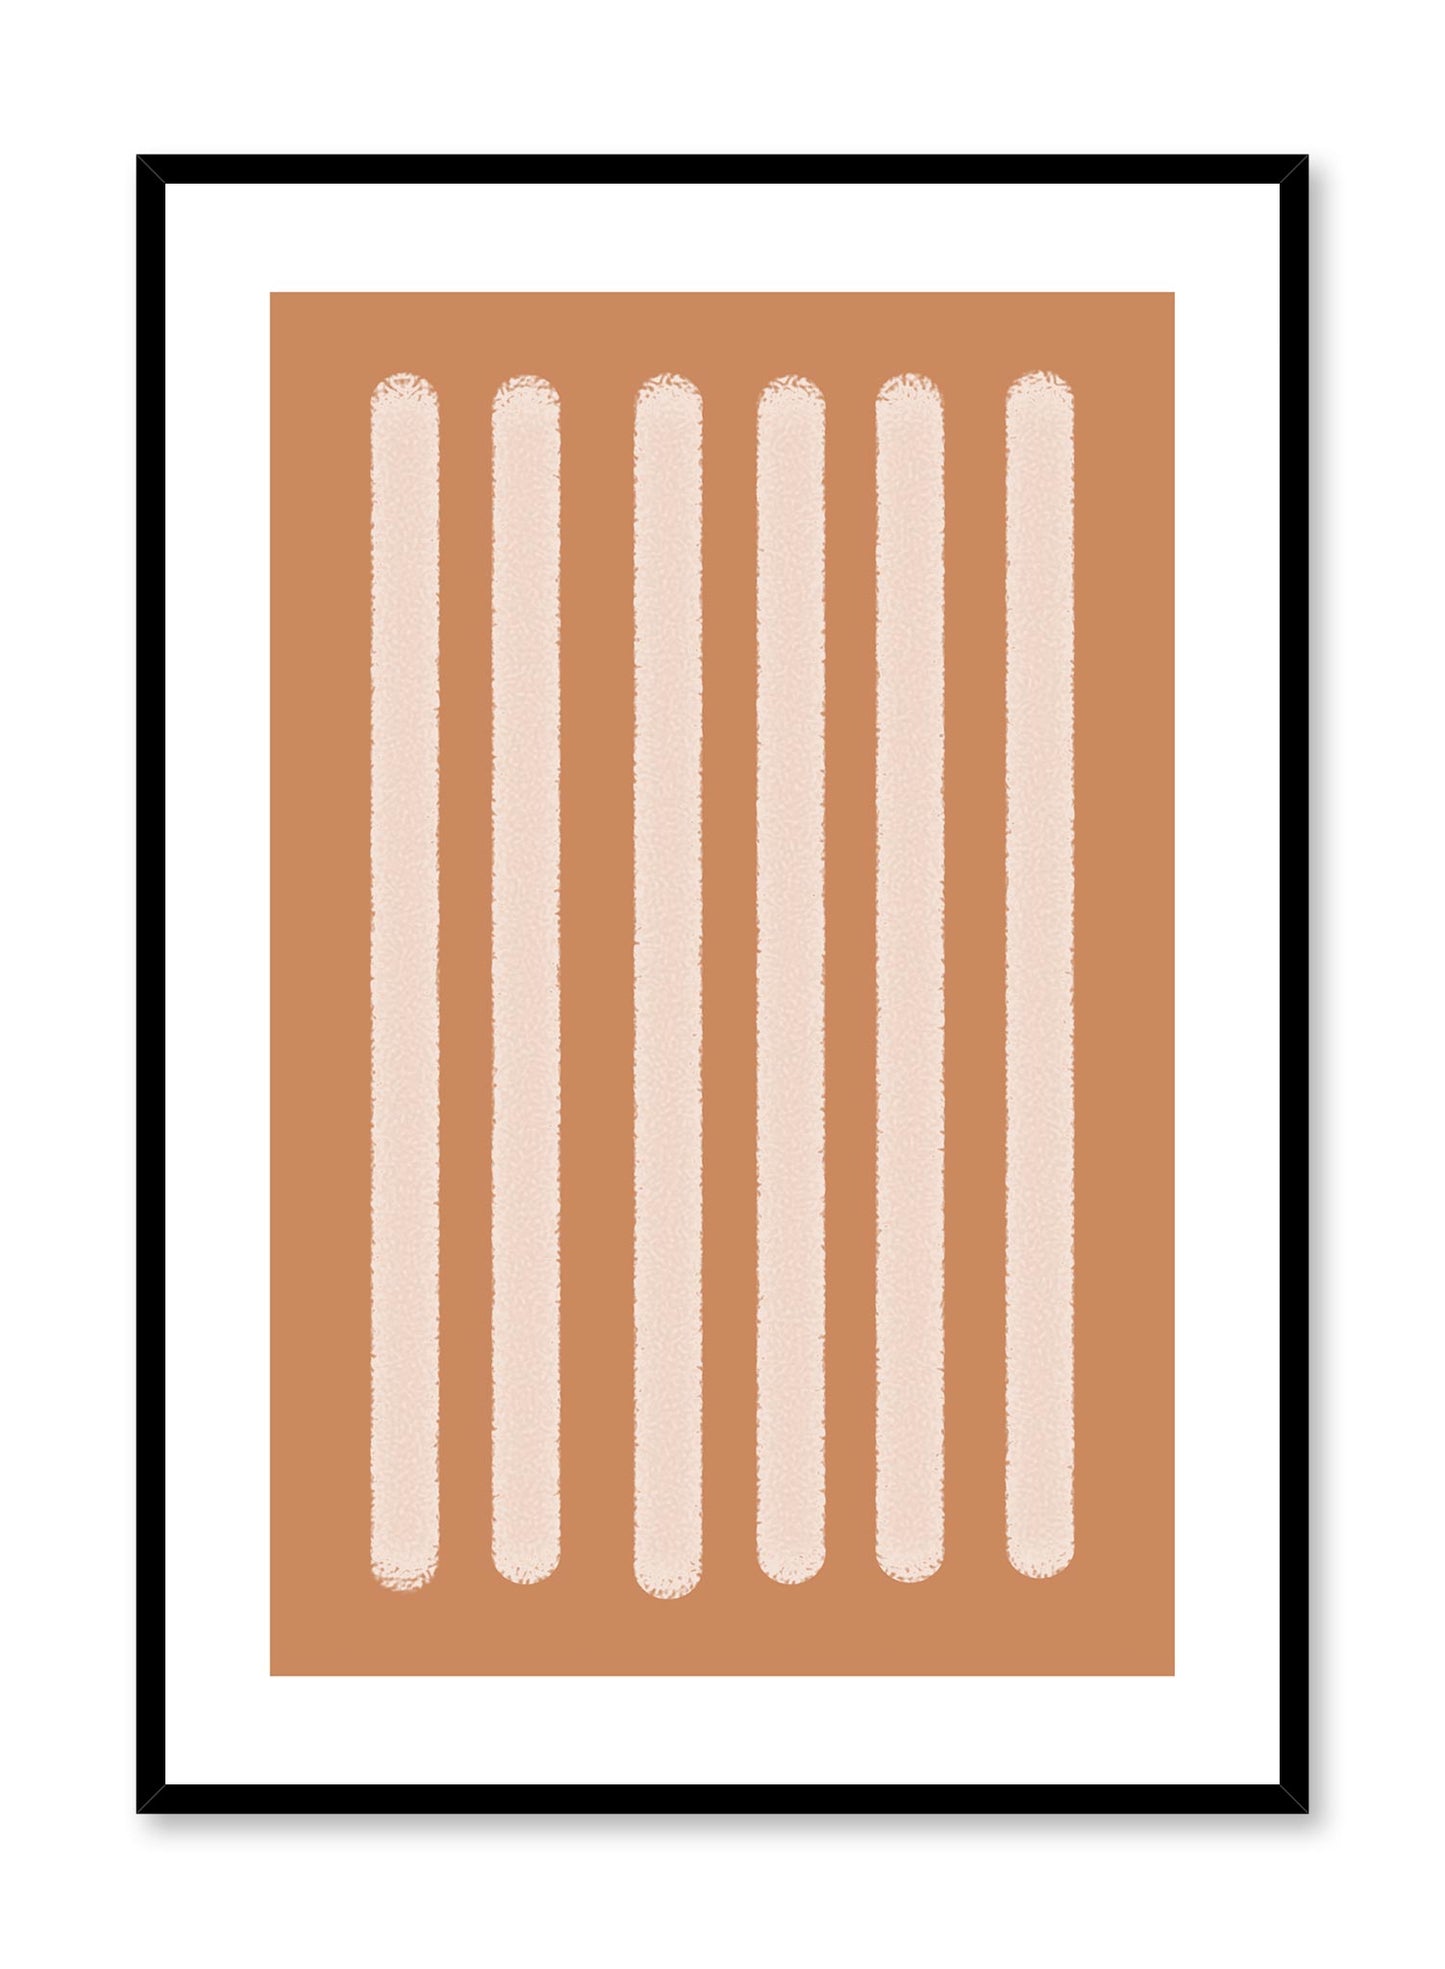 Minimalist design poster by Opposite Wall with abstract orange rectangle shapes